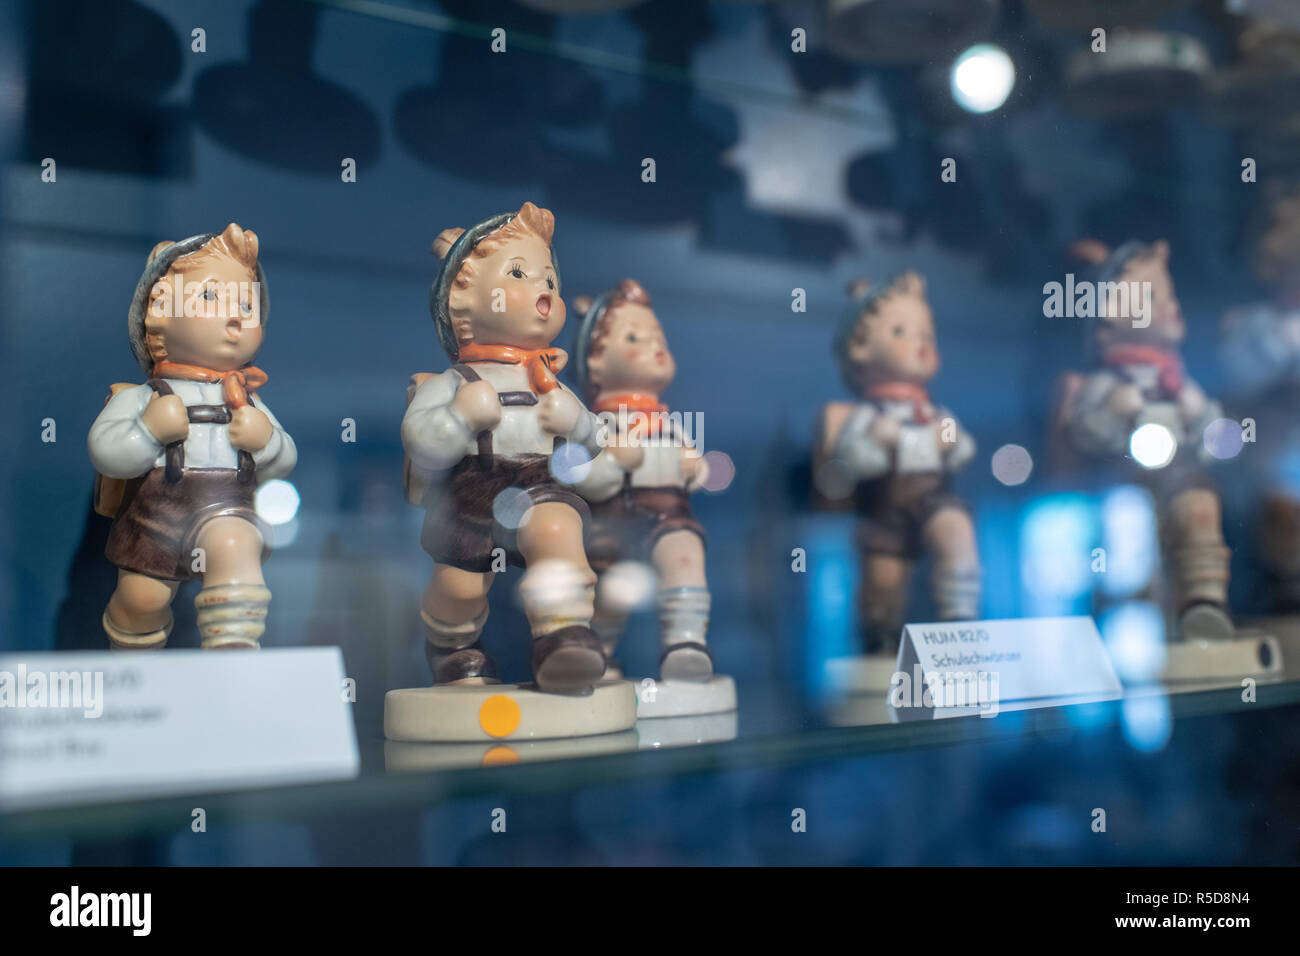 Massing, Germany. 29th 2018. Hummel porcelain figures stand in a showcase in the Berta Hummel Museum. The museum is to be saved - in the form of a permanent in